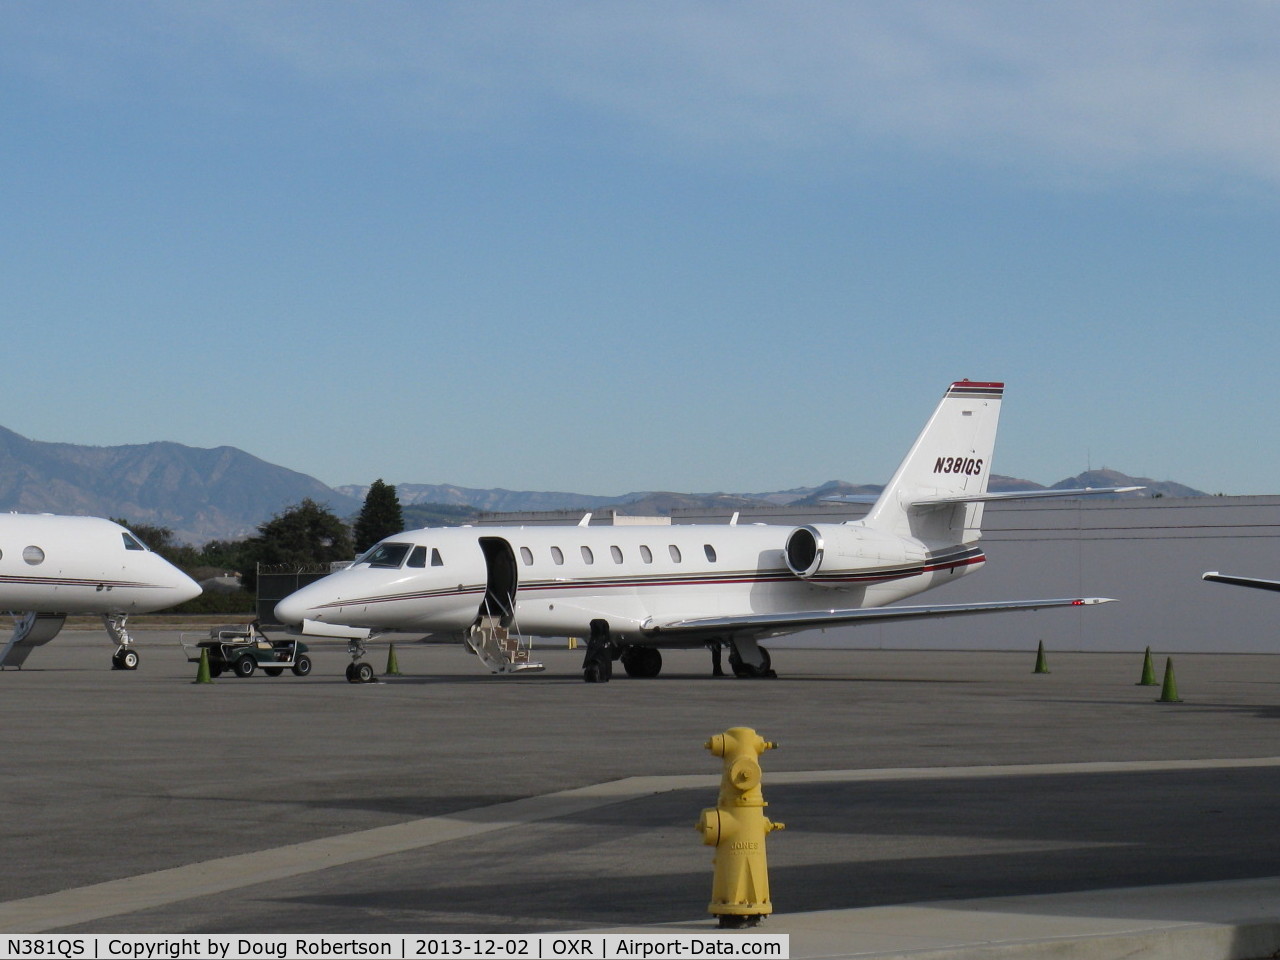 N381QS, 2006 Cessna 680 Citation Sovereign C/N 680-0097, 2006 Cessna 680 CITATION SOVEREIGN, two P&W(C)PW306C Turbofans with FADEC, flat rated at 5,770 lb st each. Target-type thrust reversers. On Golden West ramp.